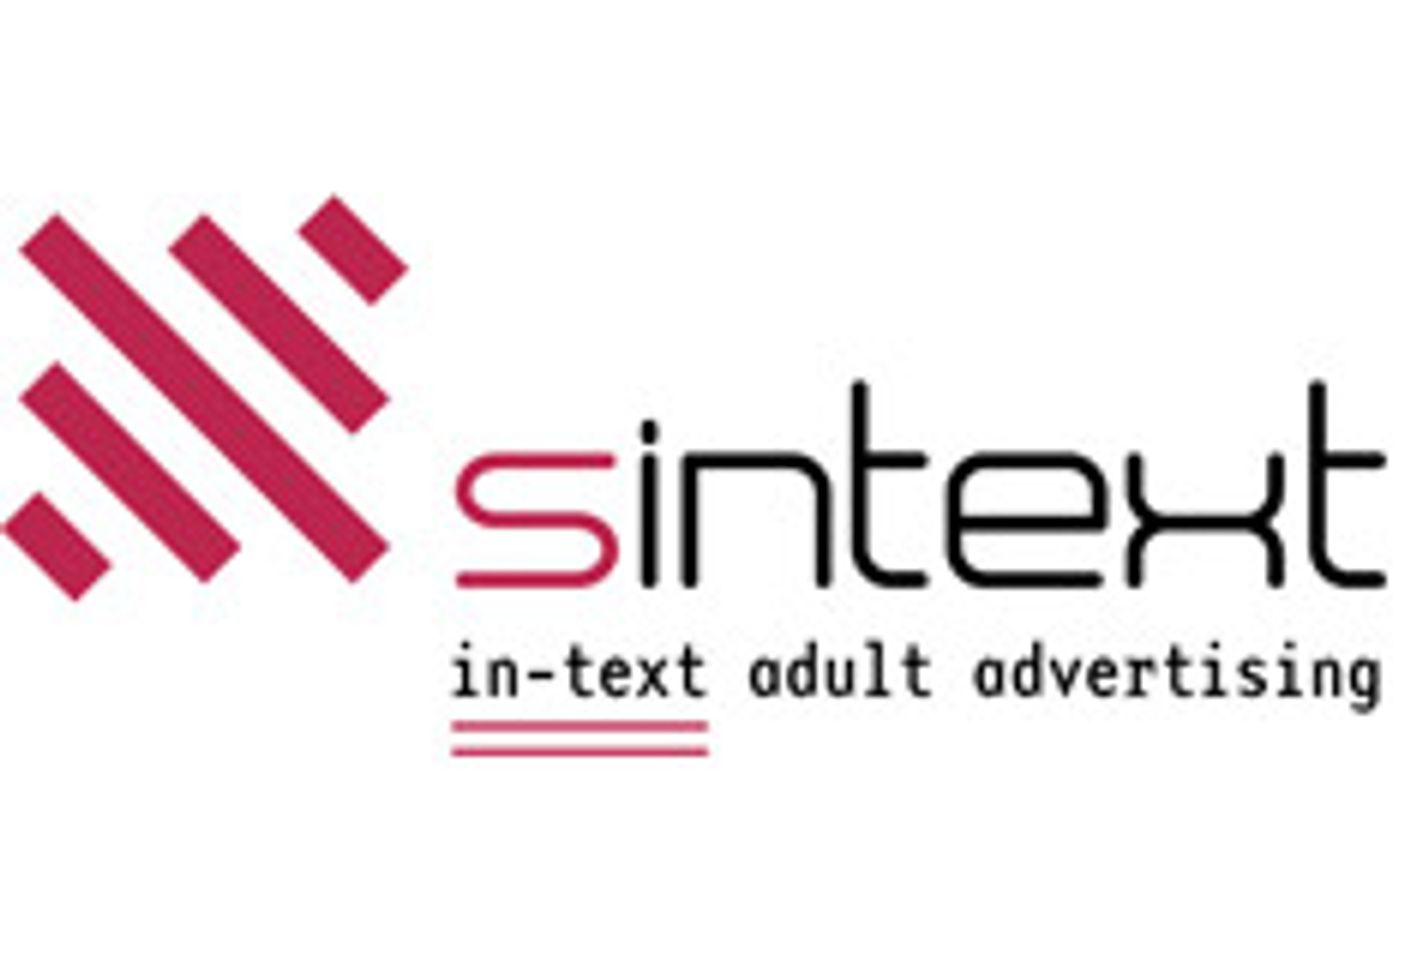 Sintext Launches In-Text Advertising Geared to Adult Market